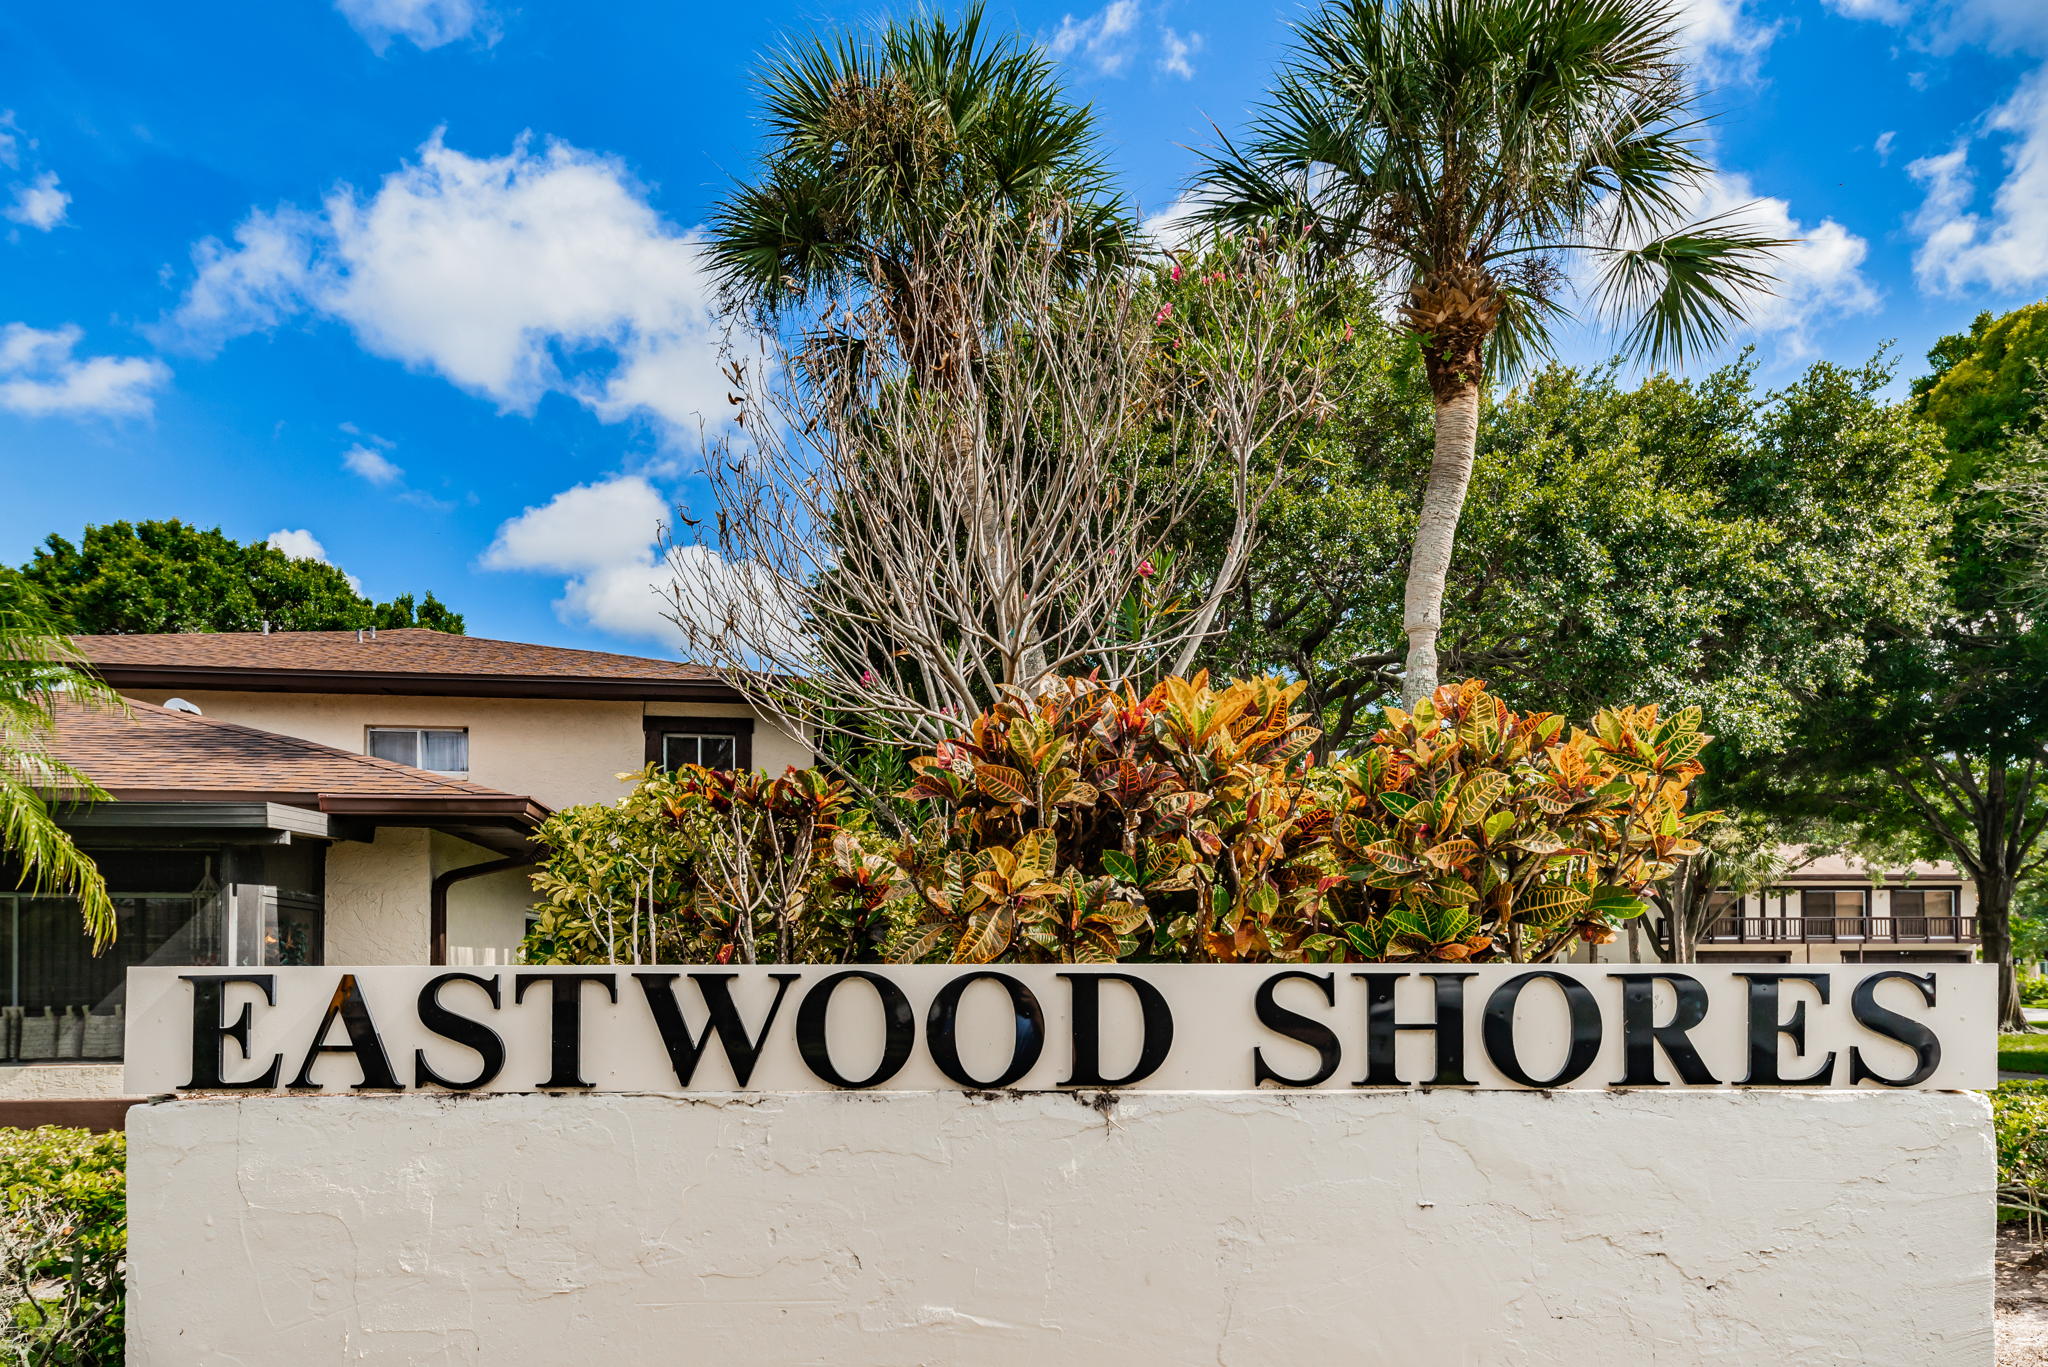 21-Eastwood Shores